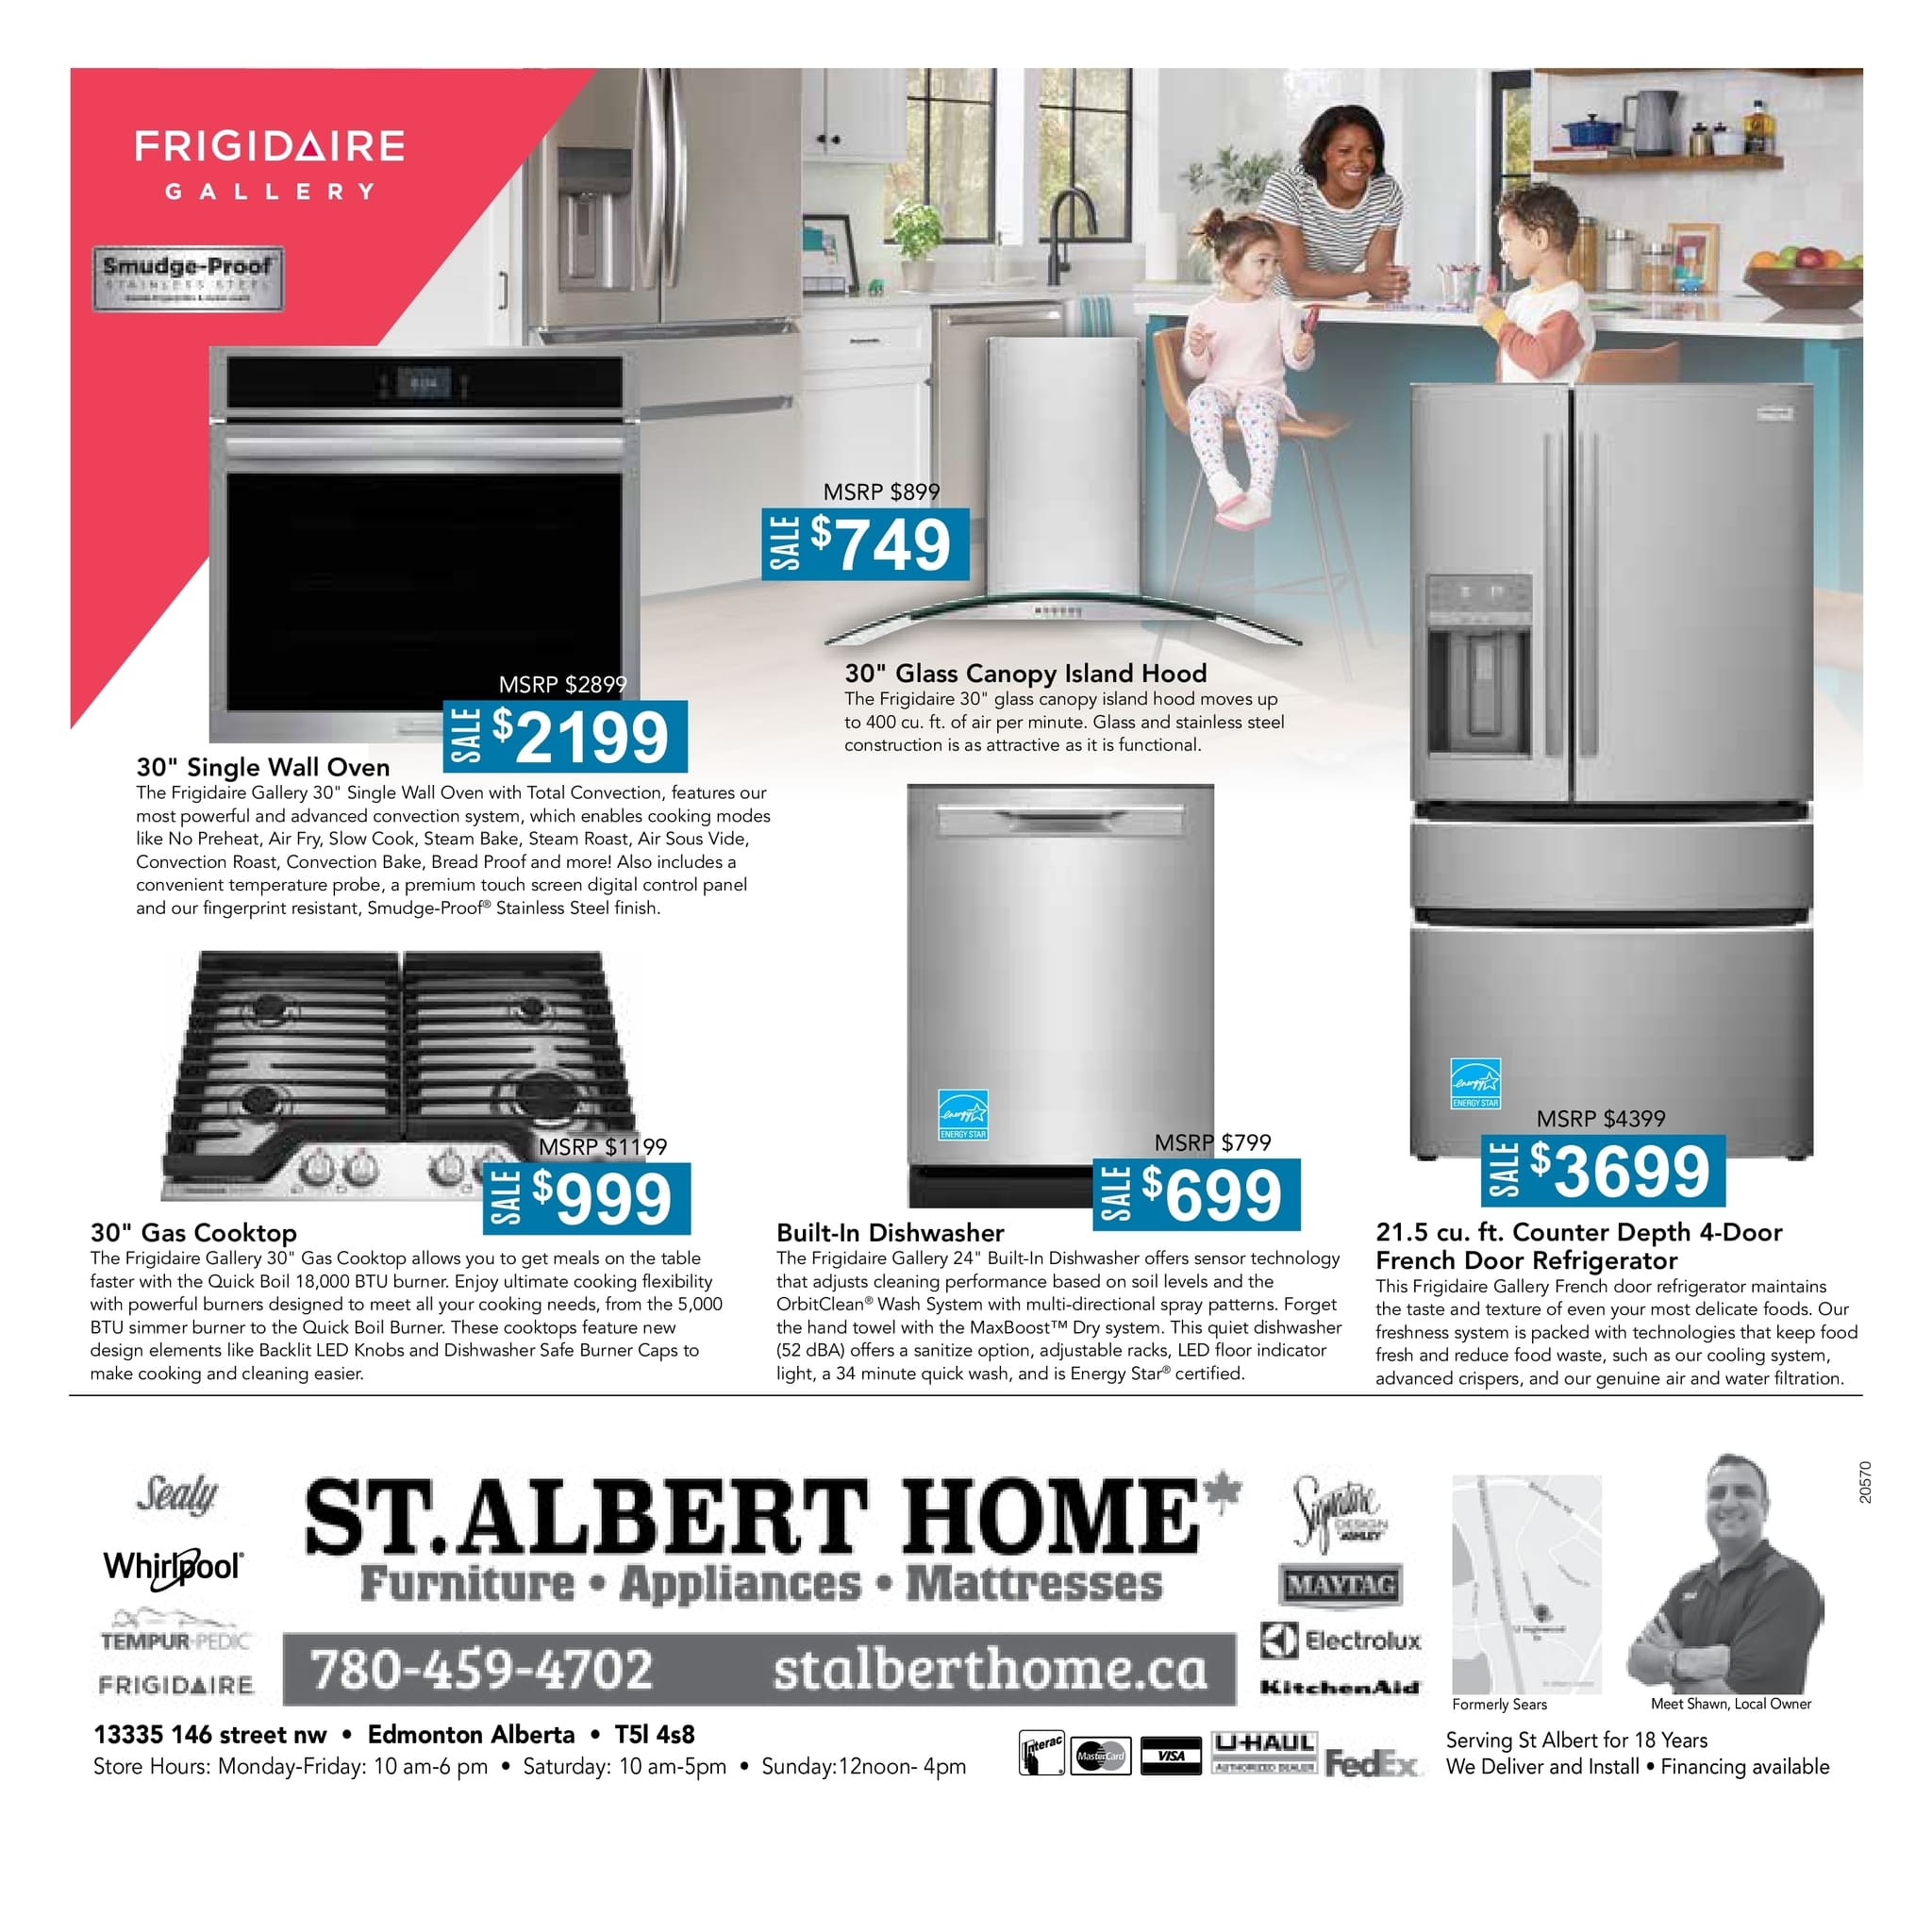 St. Albert Home - Frigidaire - Page 4